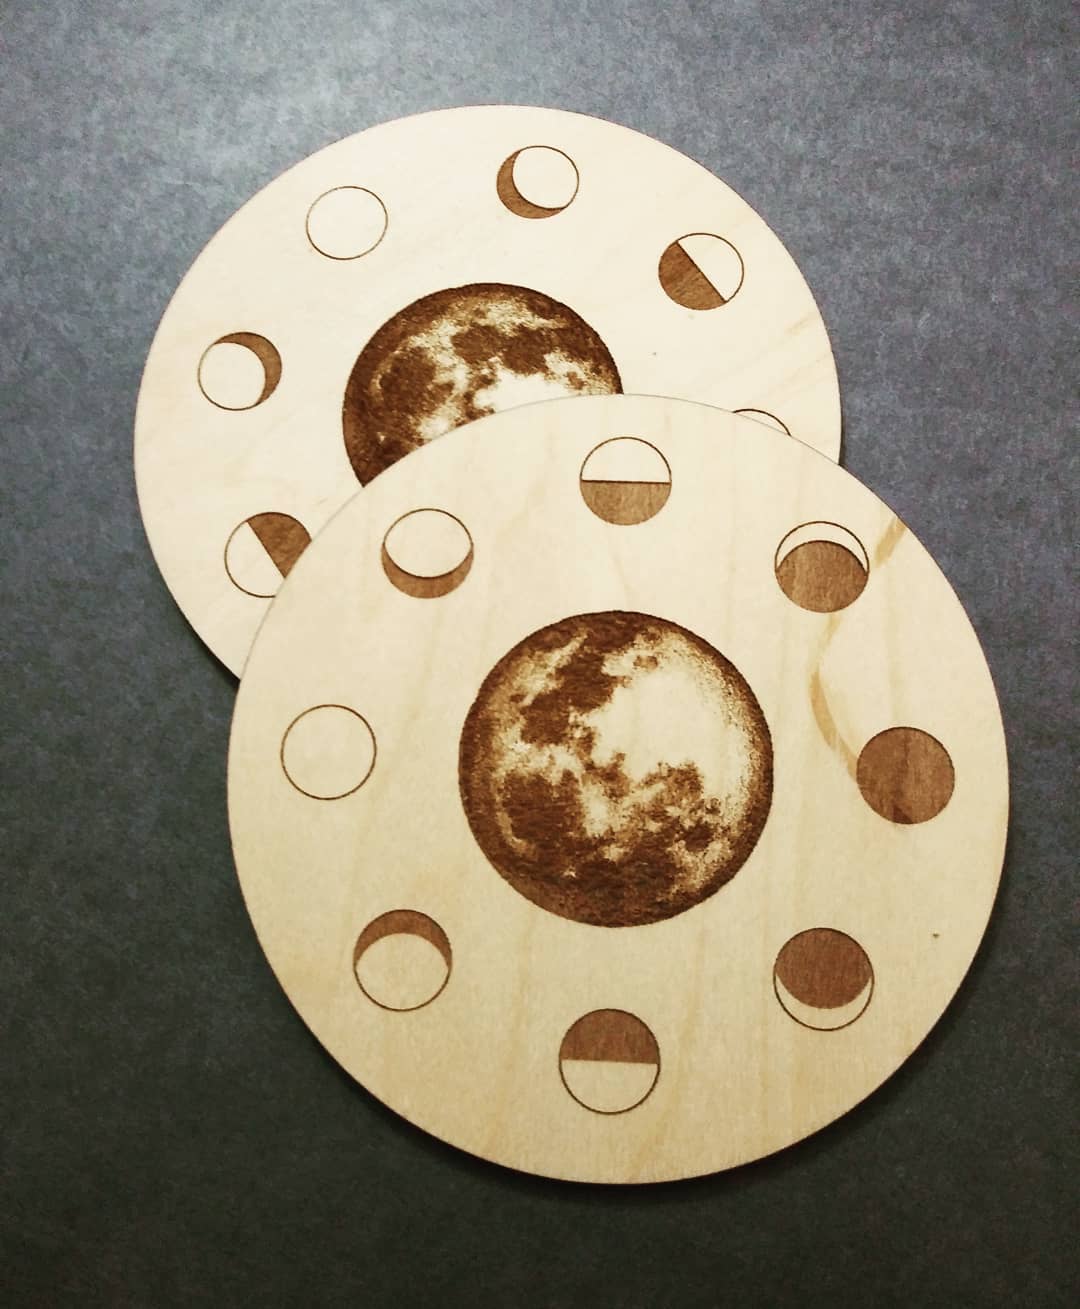 Will there be an end to me designing new coasters and new riffs on the phases of the moon anytime soon? Probably not. ? These will be with me at the Georgetown Trailer Park Mall Holiday Bizarre Bazaar this Saturday. #Seattle #moon #shoplocal #indieartist